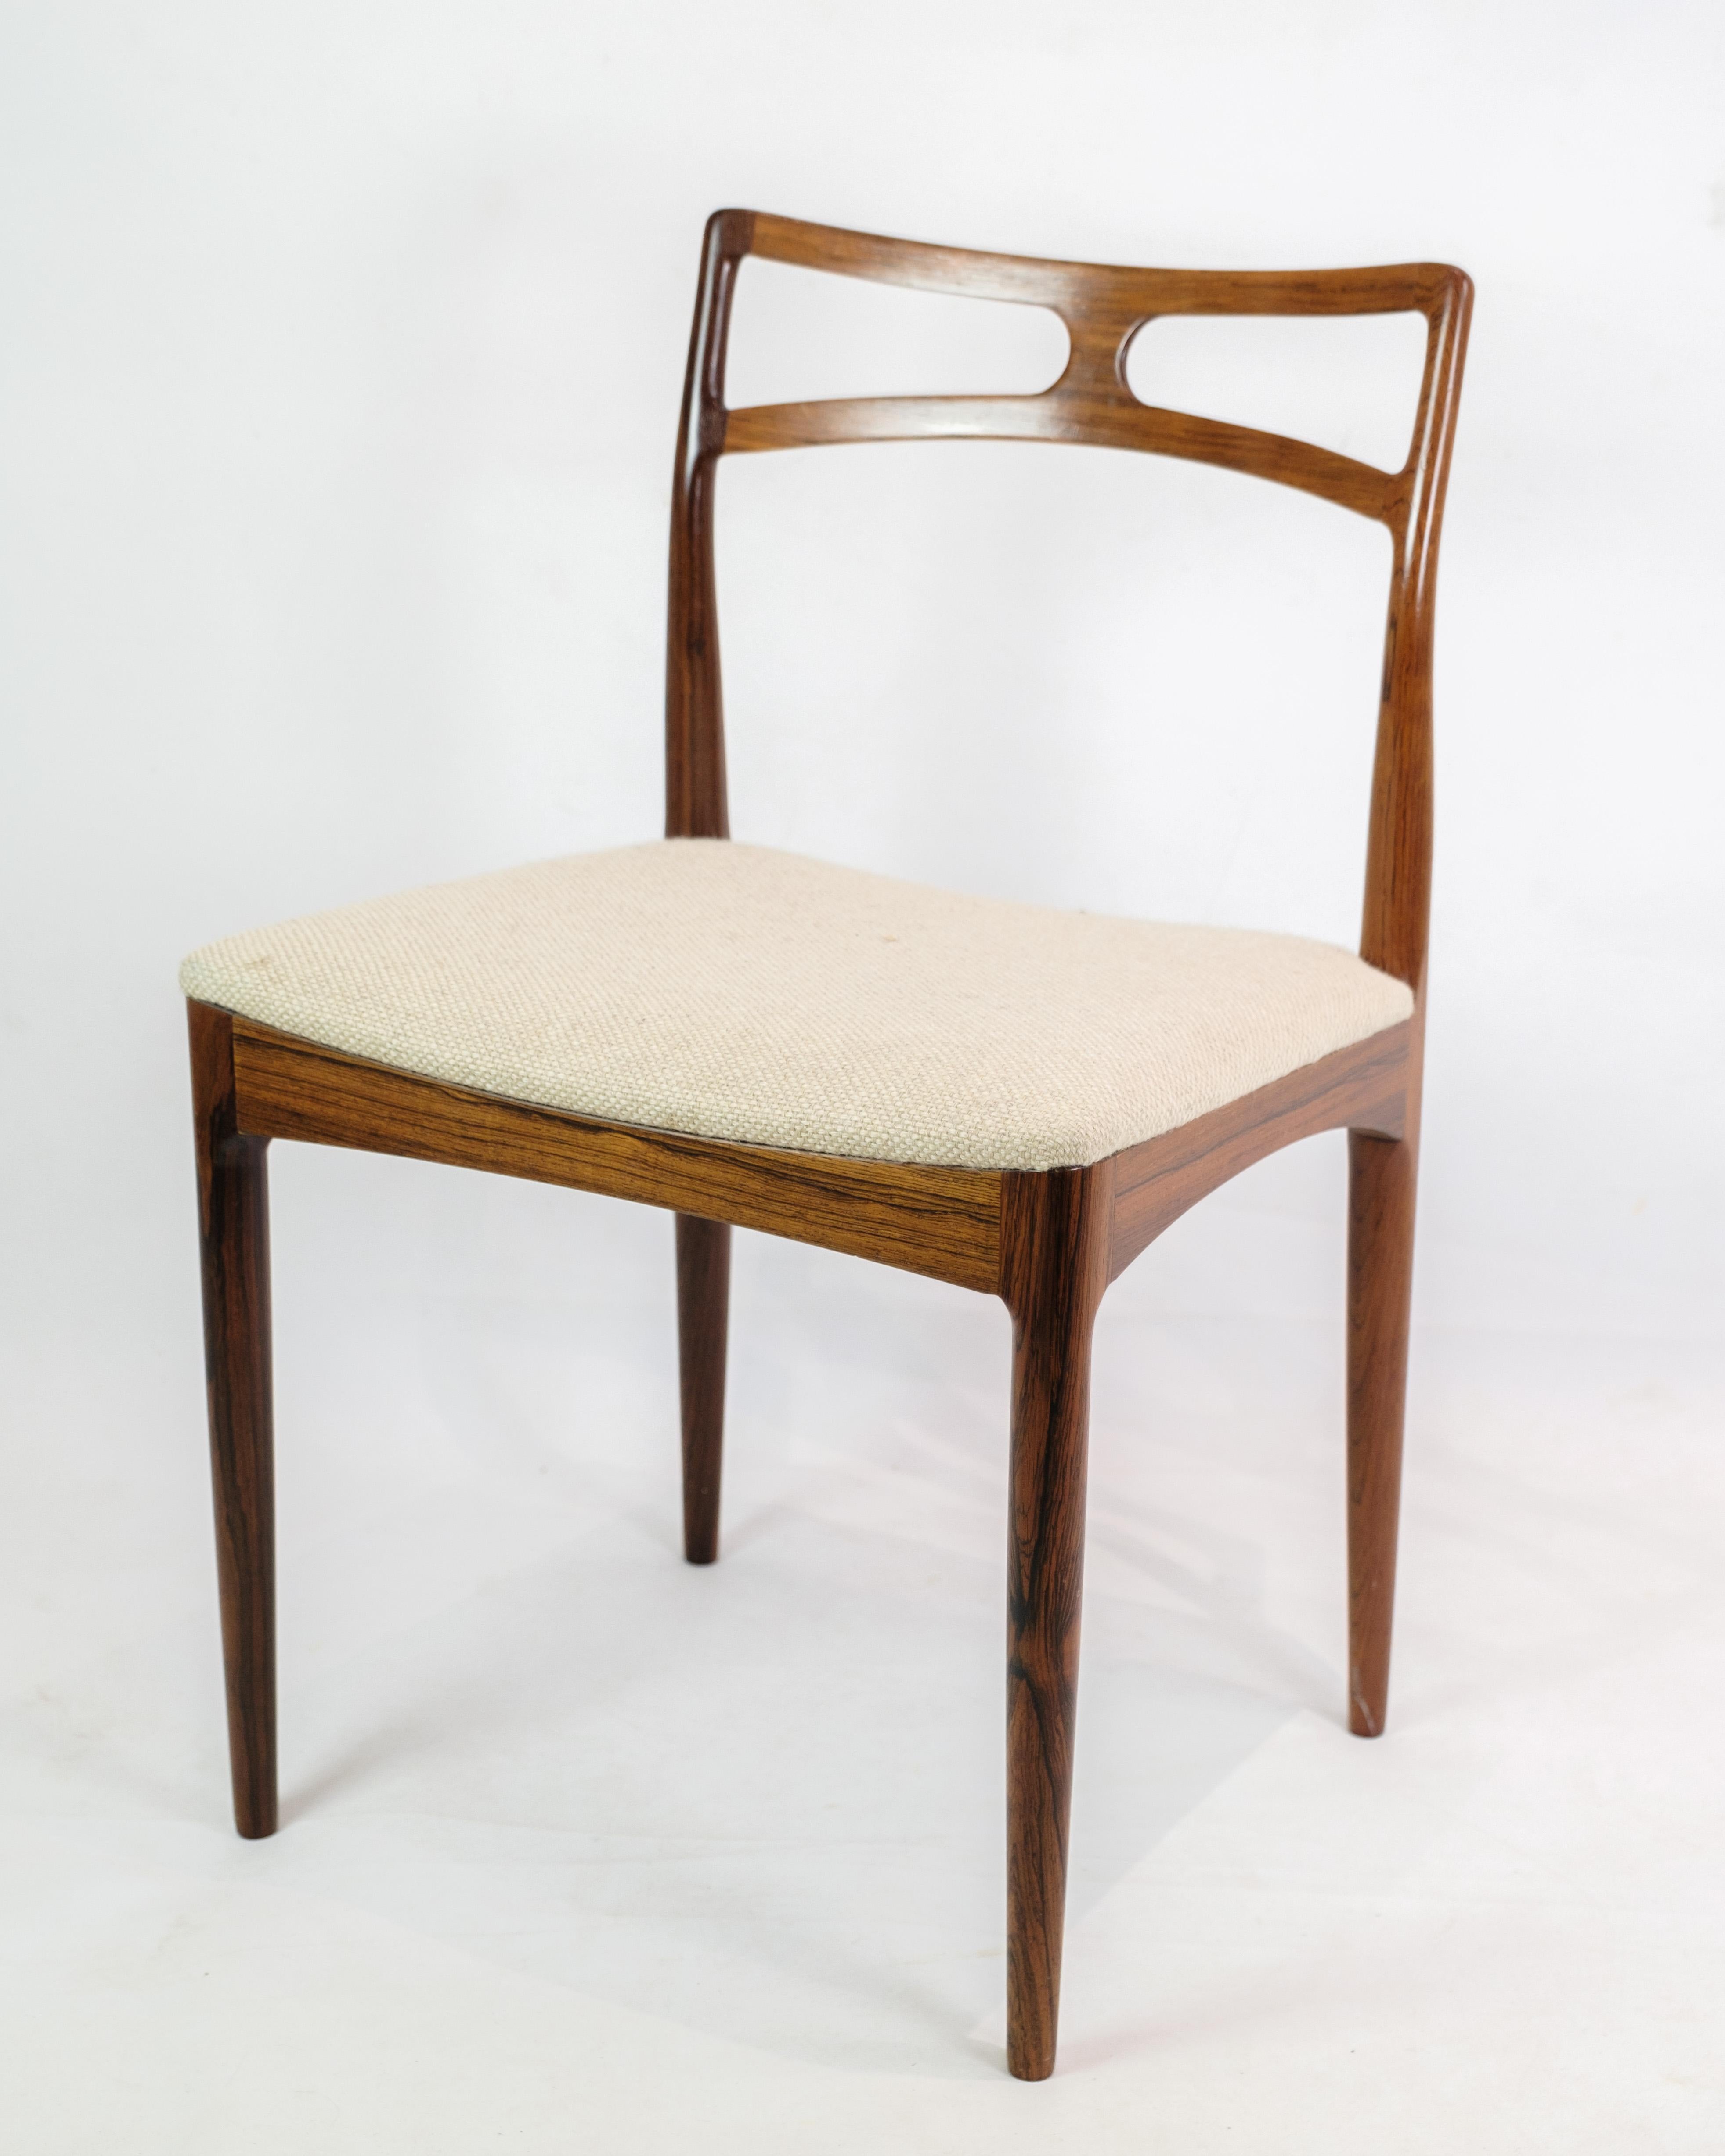 Experience timeless elegance with this set of two chairs, model 94, created by the talented designer Johannes Andersen and manufactured by Chr. Linnebergs Møbelfabrik around the 1960s. The chairs, made of rosewood, radiate a subtle luxury and